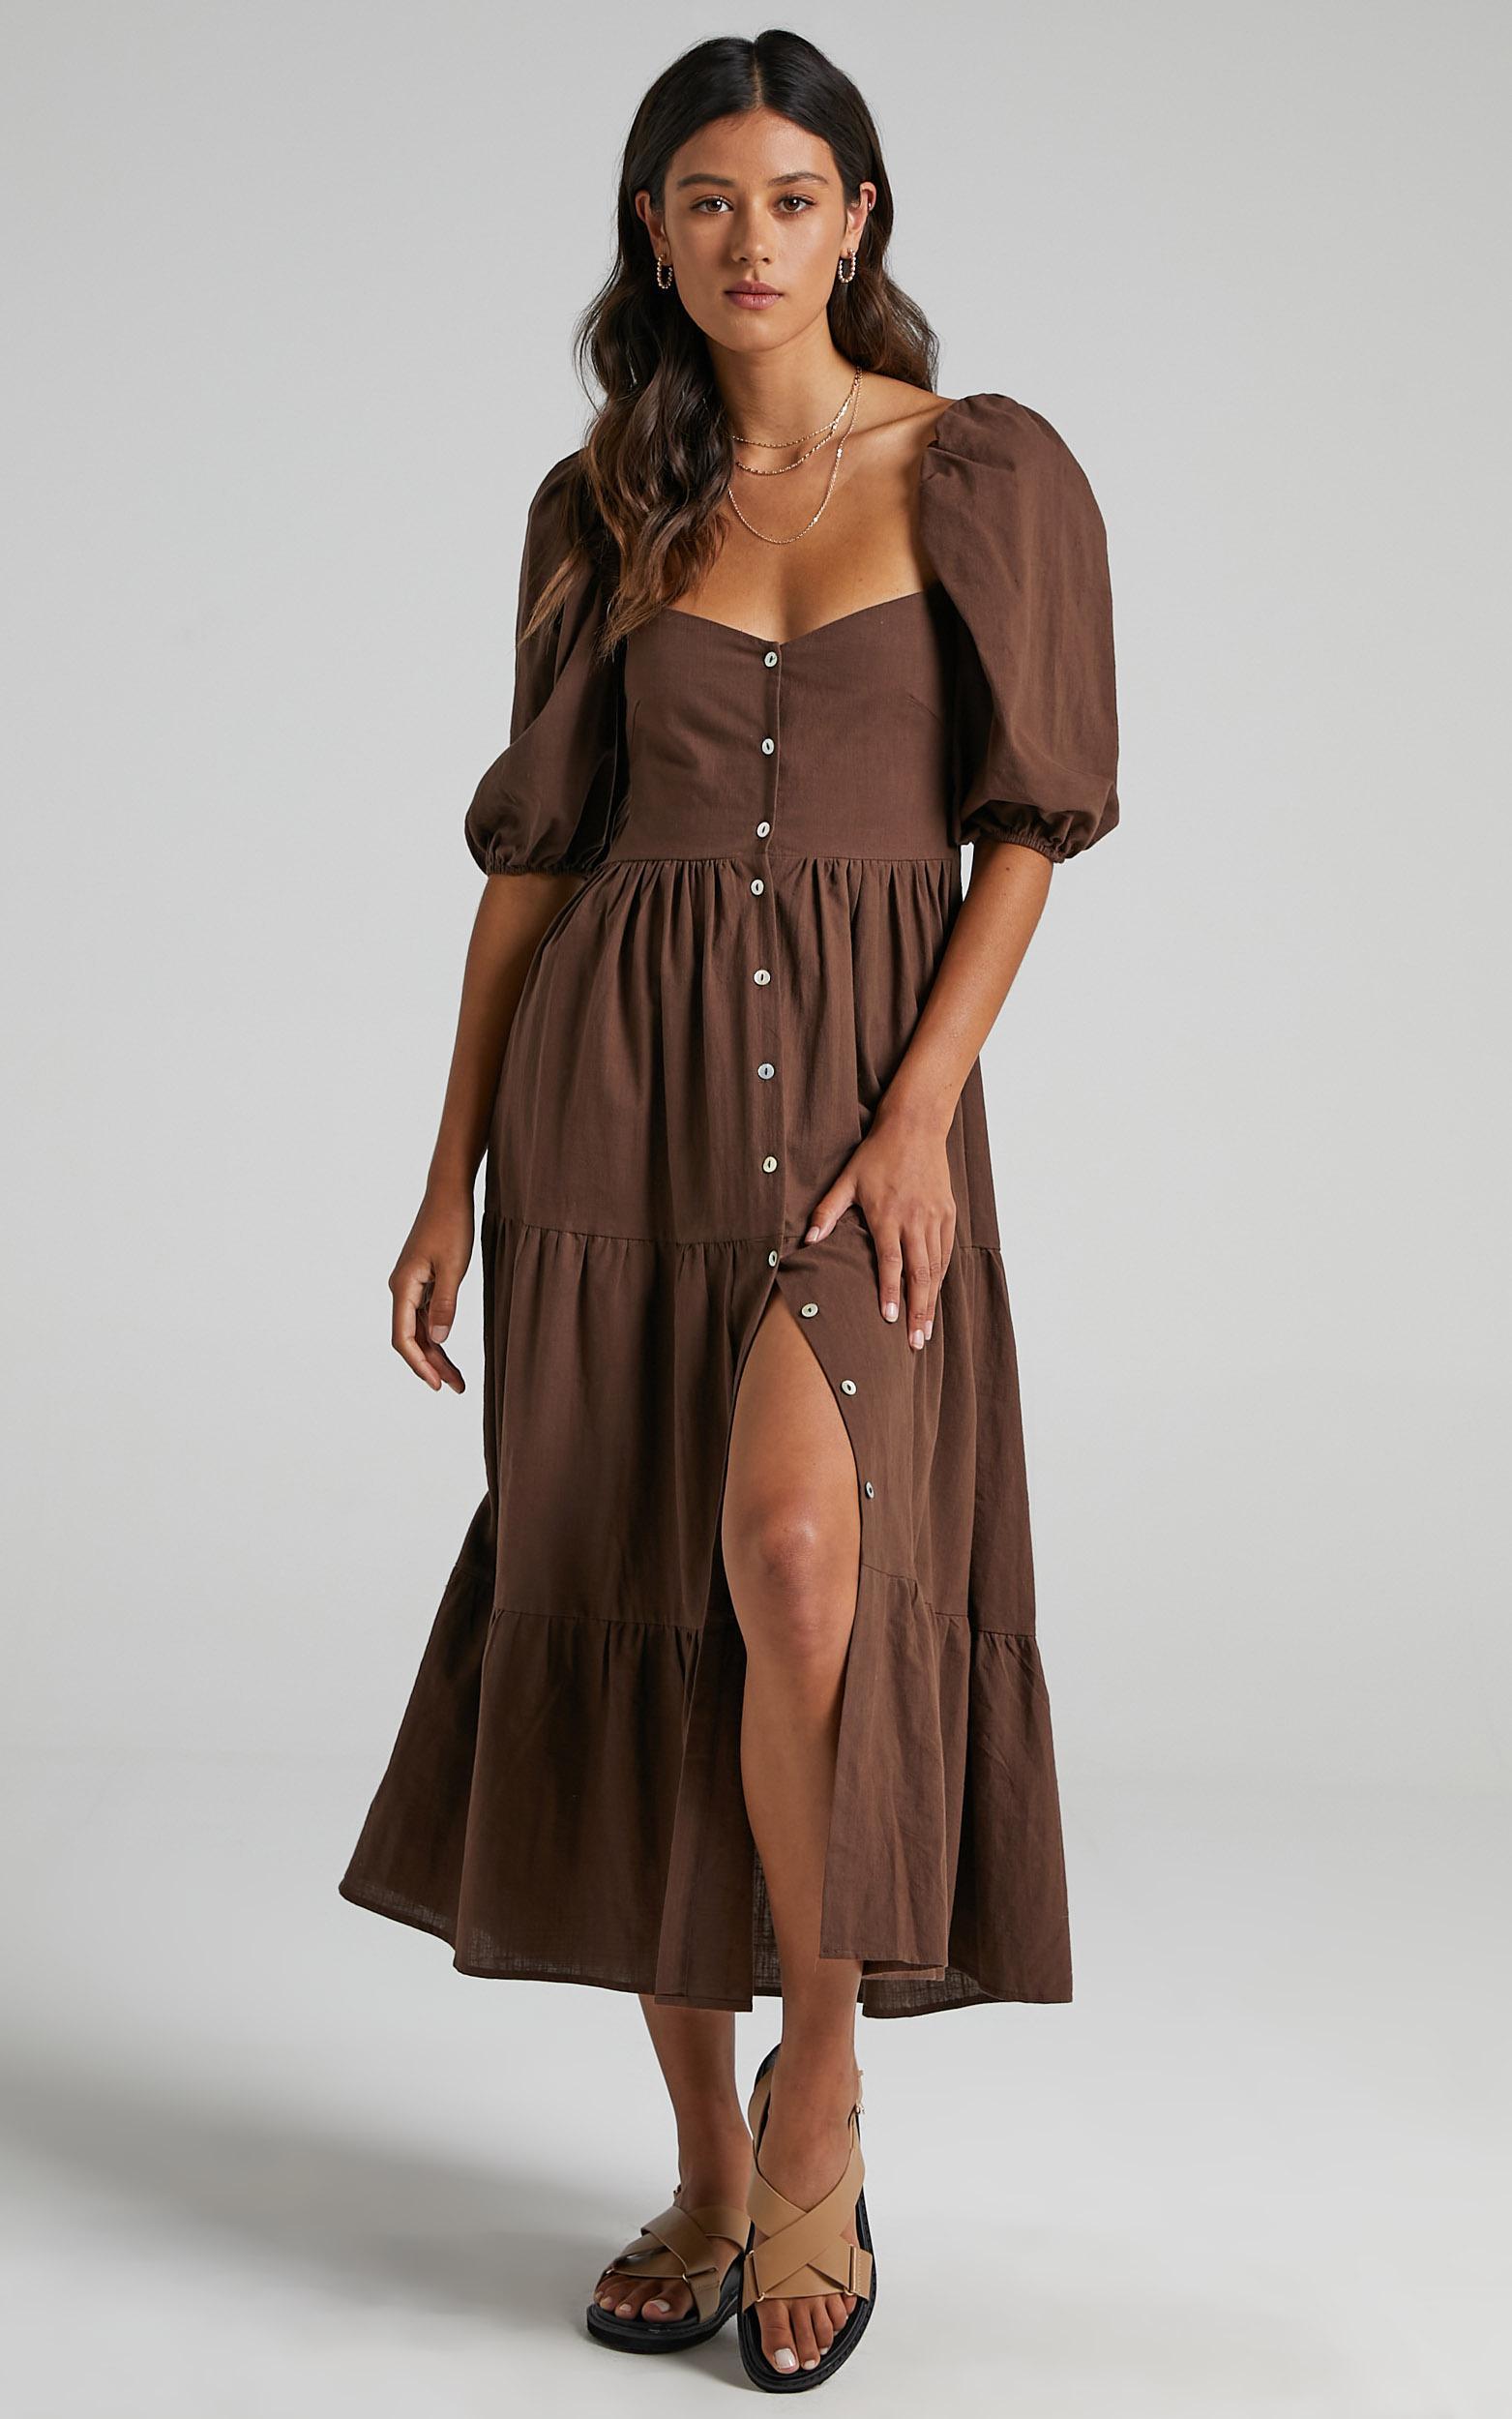 Palmer Dress in Chocolate - 06, BRN3, hi-res image number null